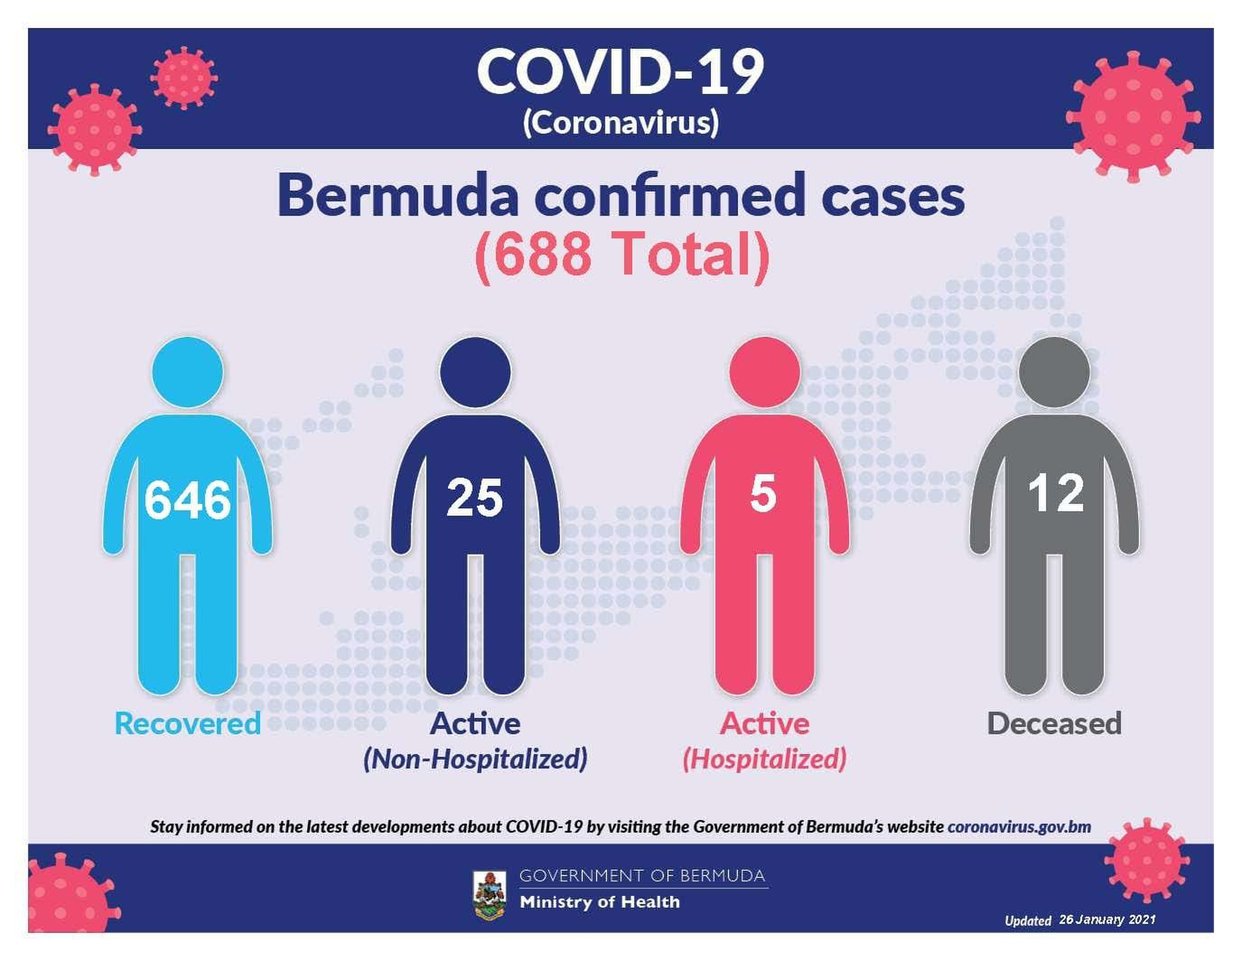 Two new COVID-19 cases reported in Bermuda, 26 January